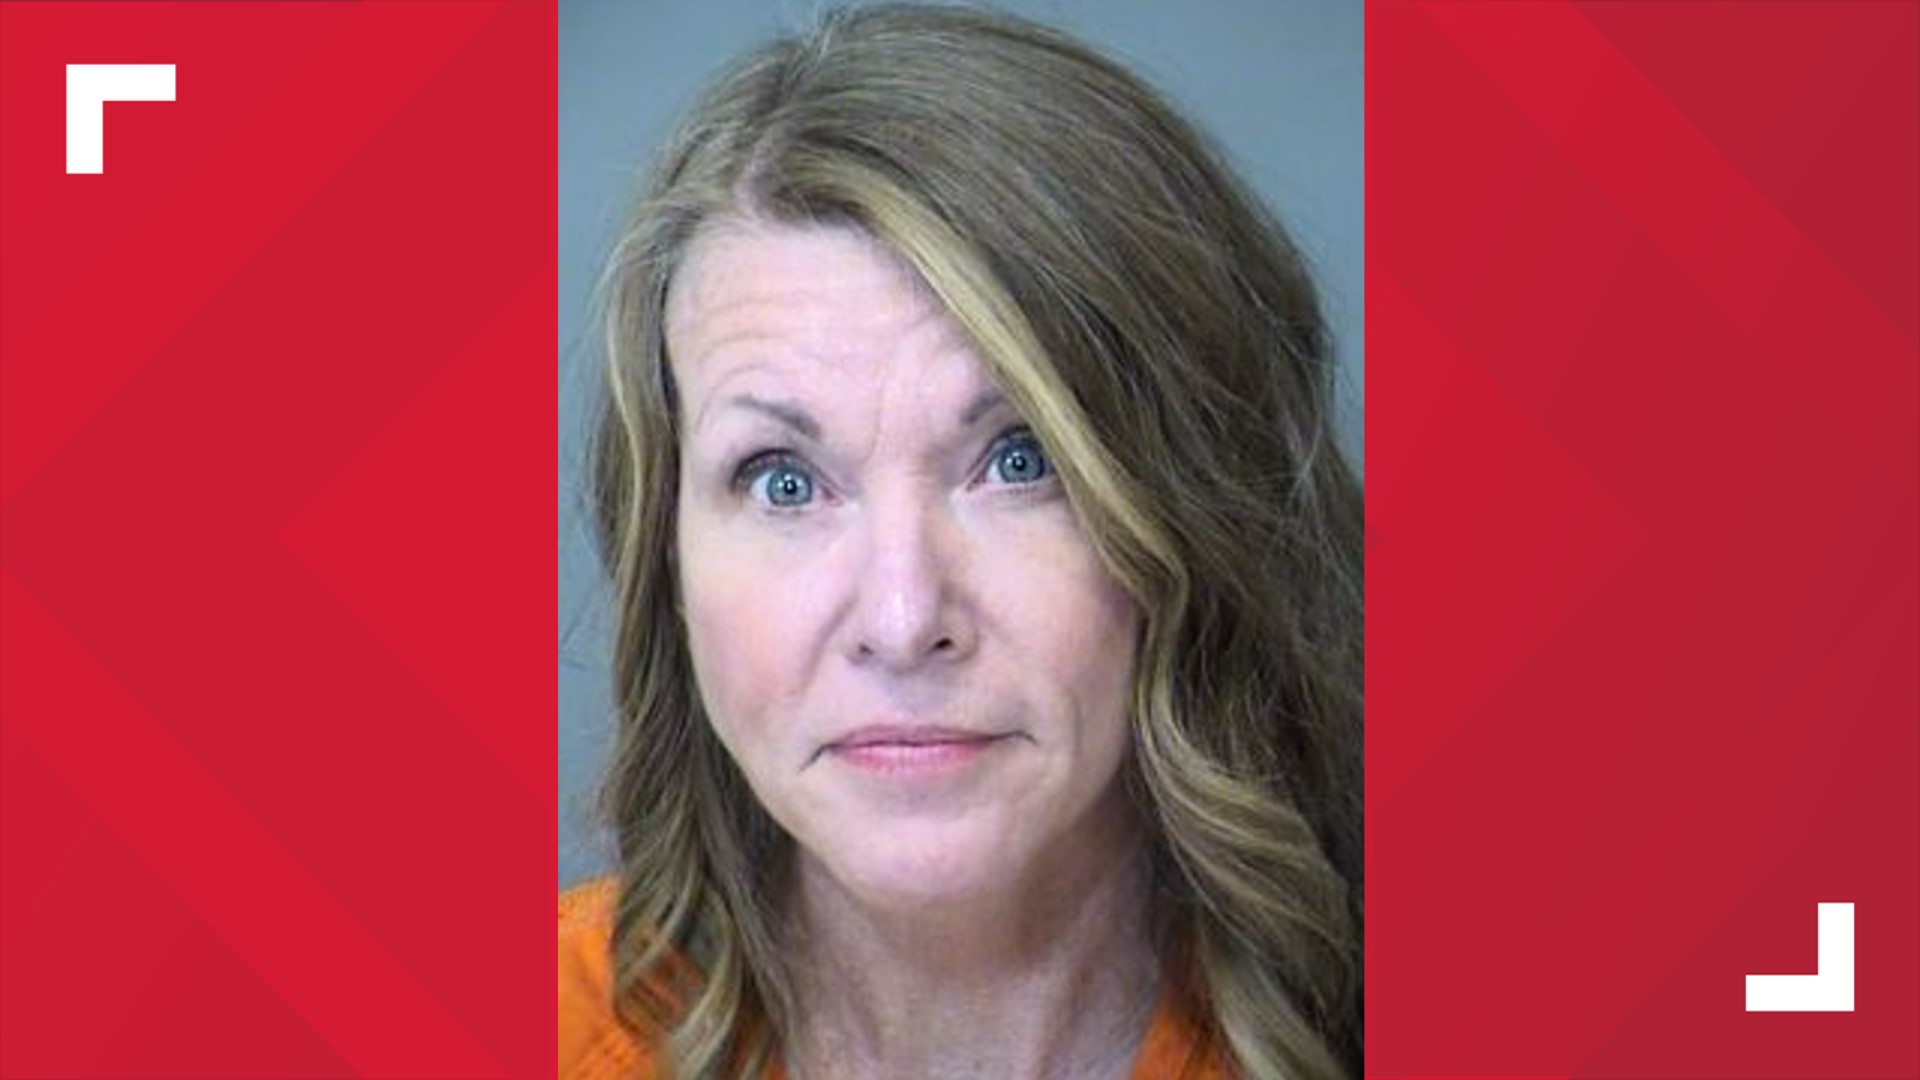 Lori Vallow Daybell was transferred from the Pocatello Women's Correctional Center on Wednesday and booked into the Maricopa County-Estrella Jail in Arizona.